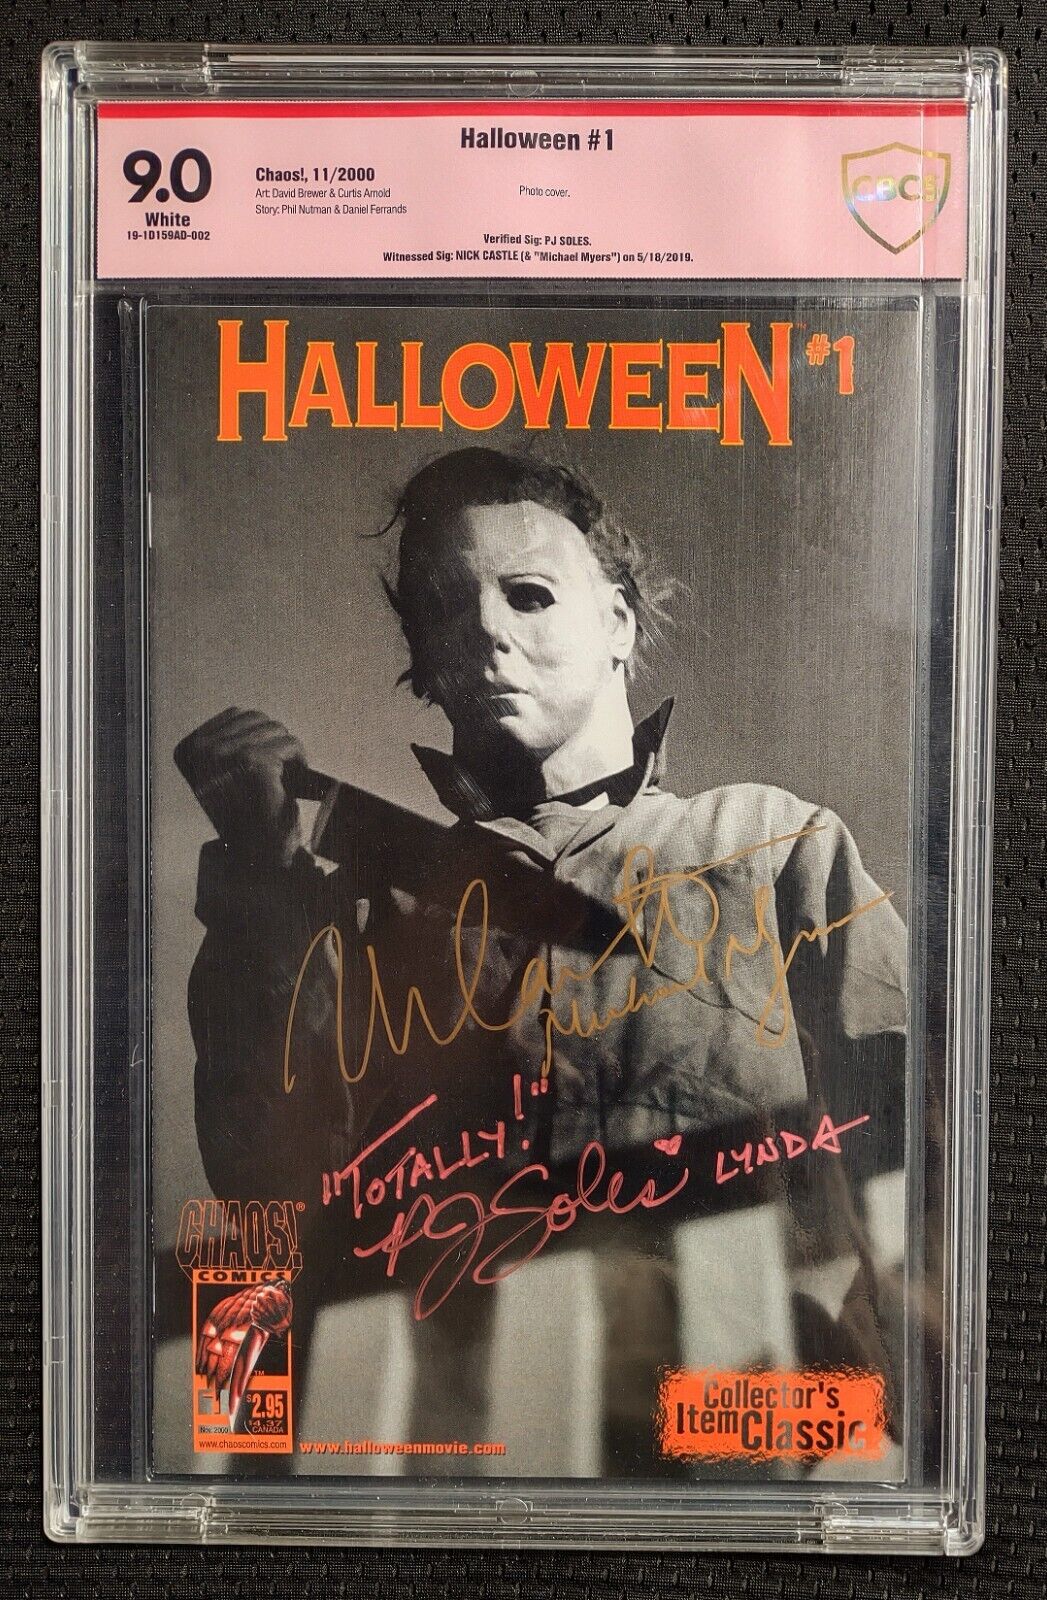 SIGNED Nick Castle PJ Soles Halloween #1 Chaos 2000 1st Appearance Michael Myers